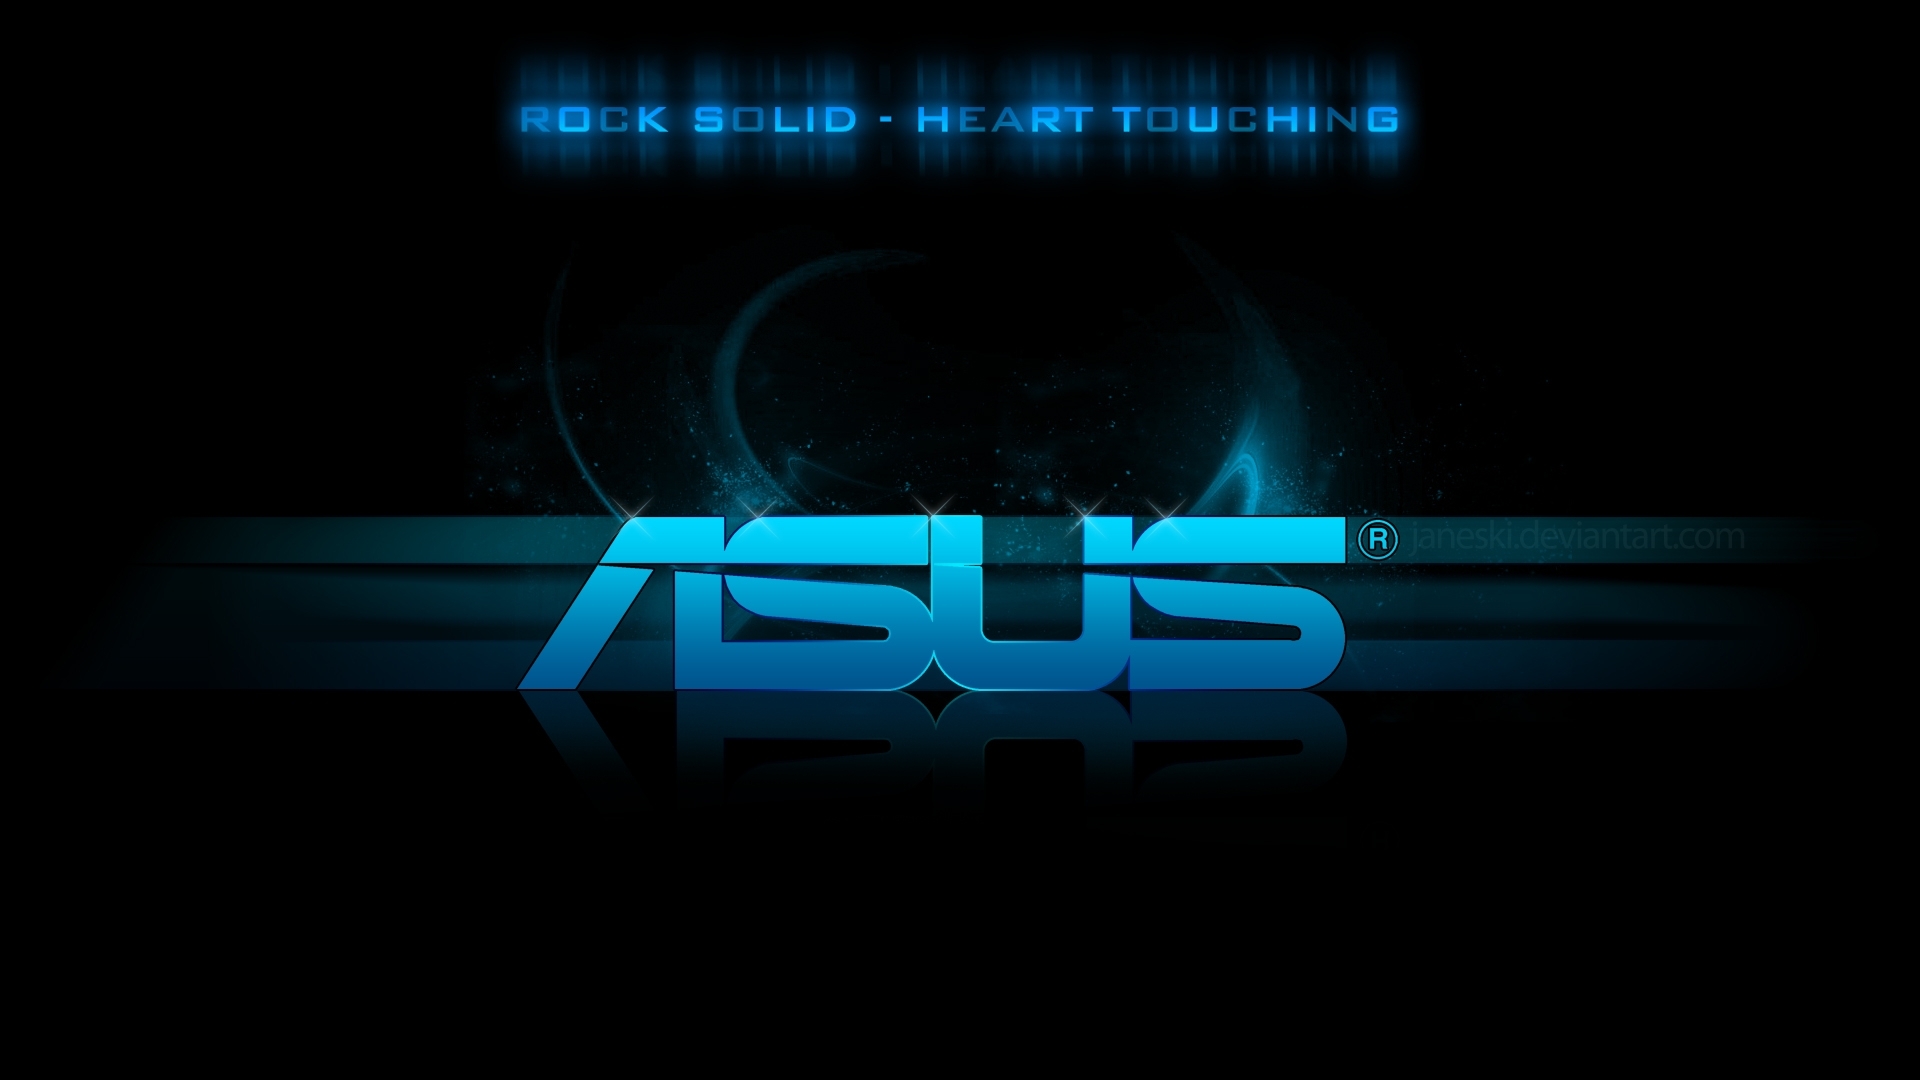 Asus 4K wallpapers for your desktop or mobile screen free and easy to